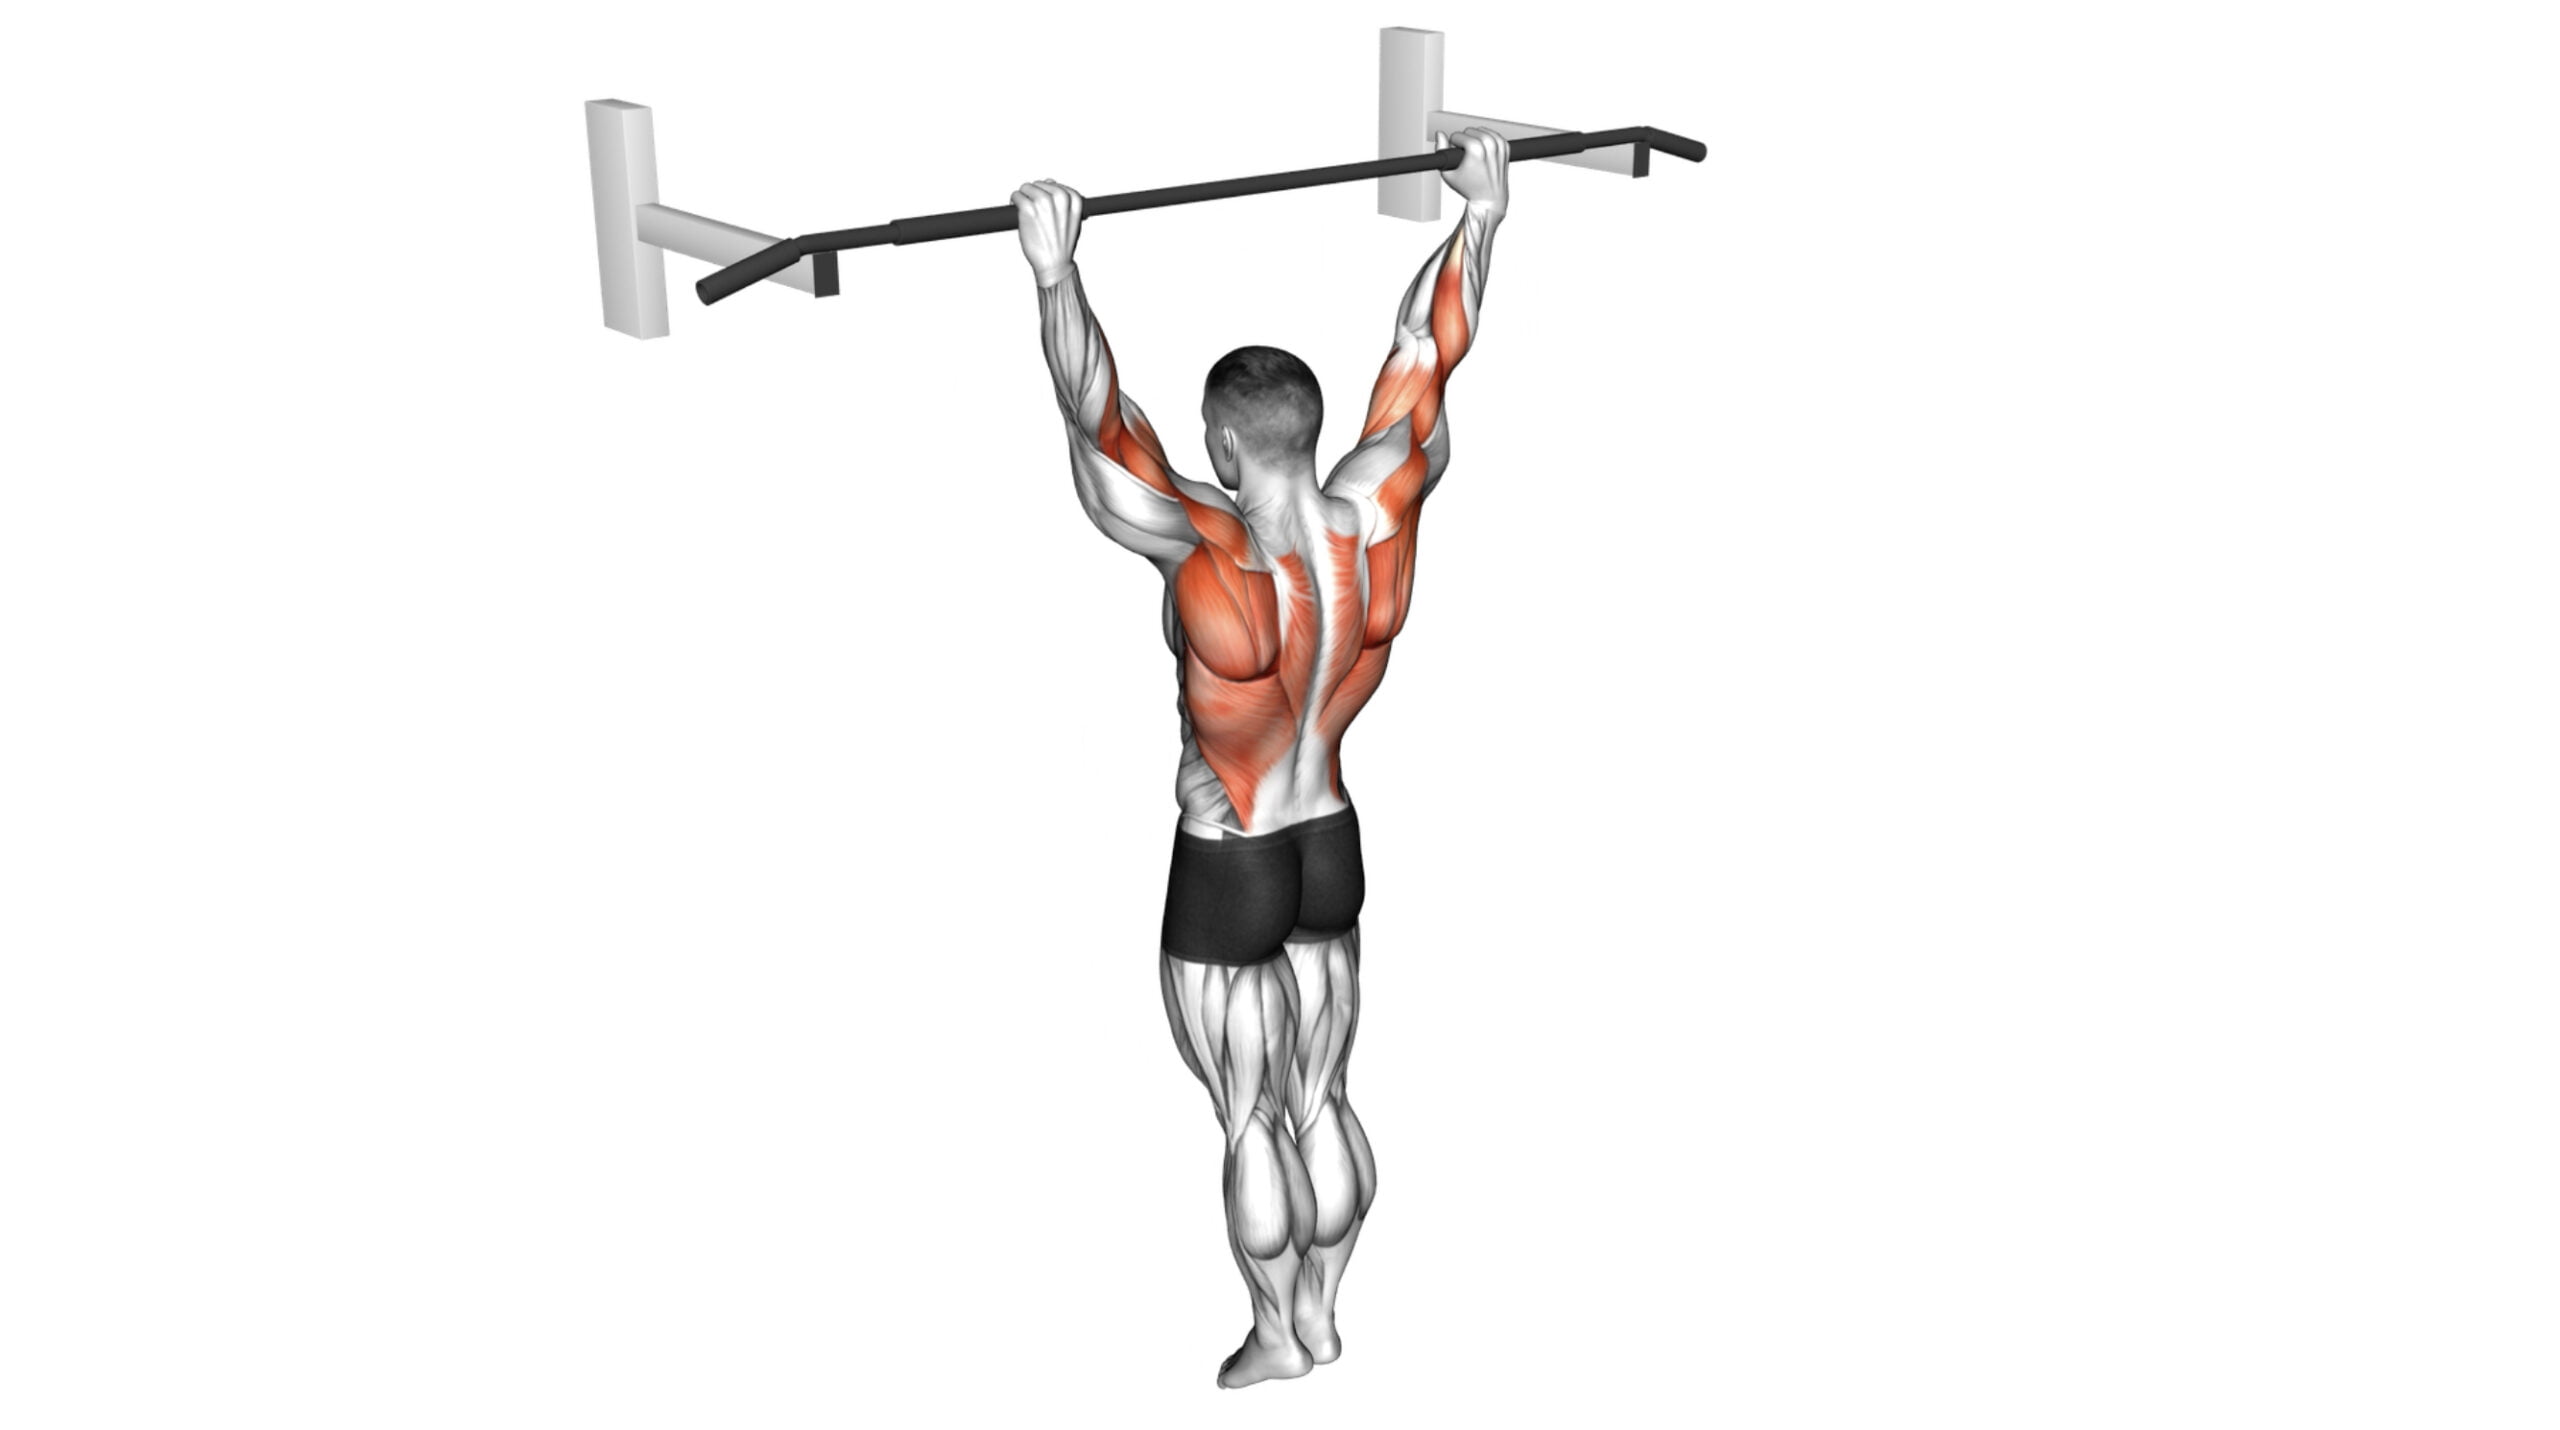 10 Upper Body Compound Exercises: The Ultimate Guide For Building Strength And Muscle